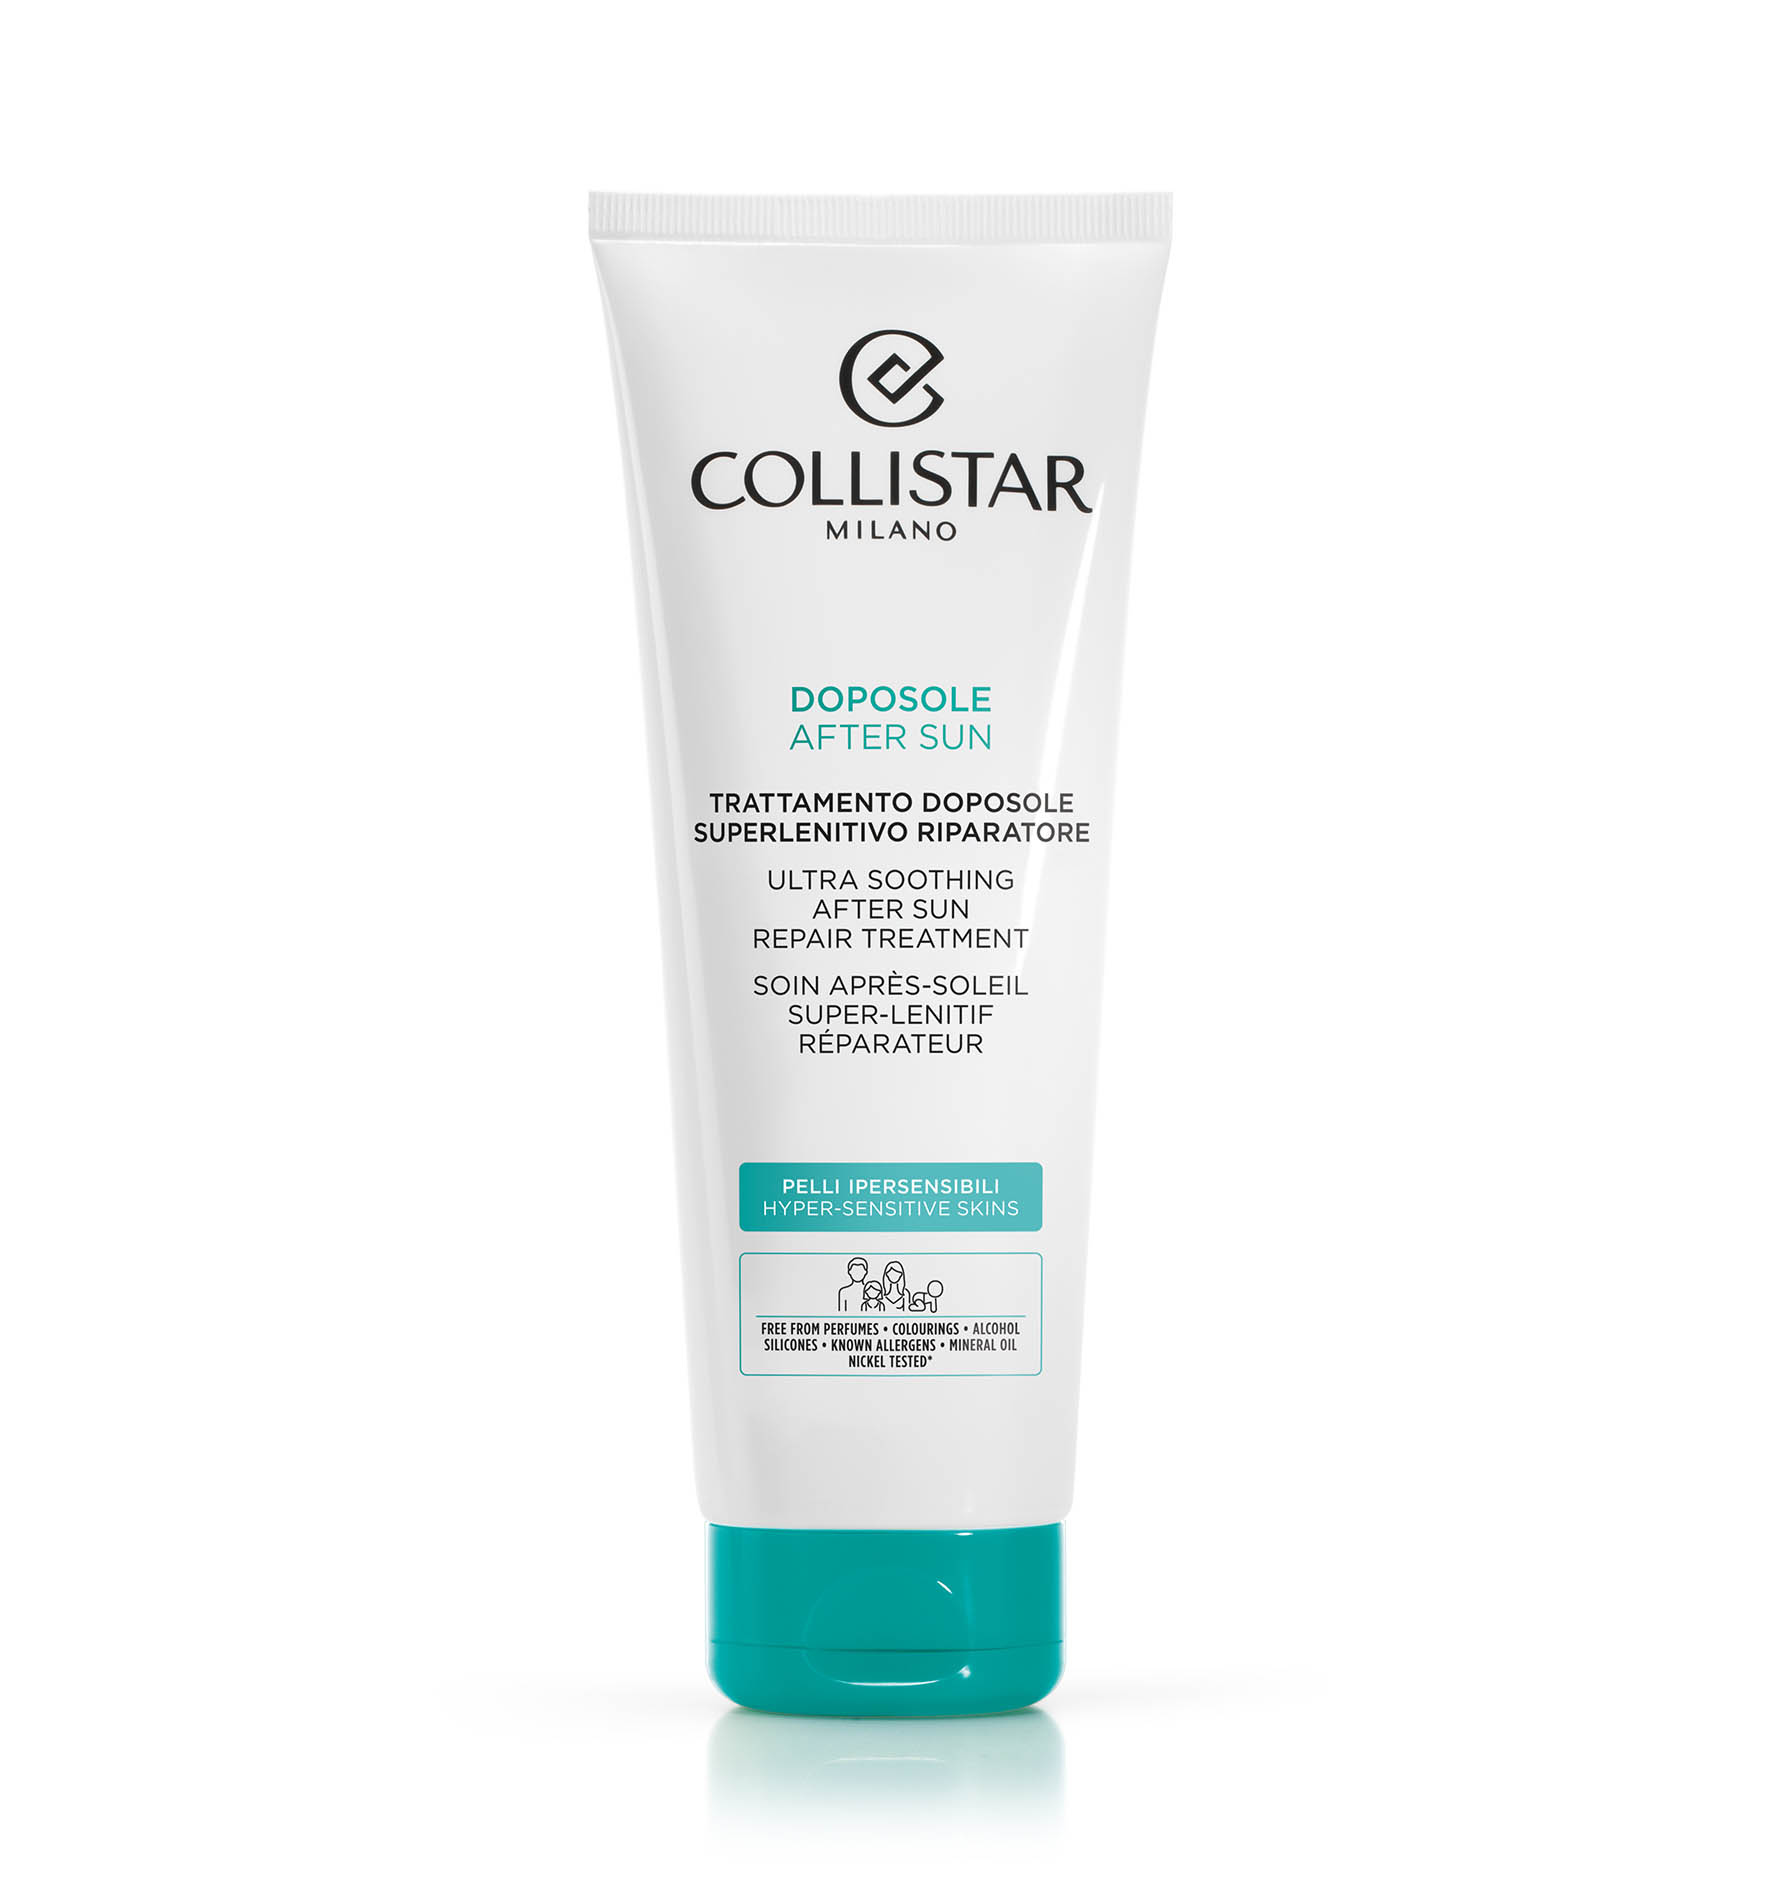 ULTRA SOOTHING AFTER SUN REPAIR TREATMENT - Overgevoelige huid | Collistar - Shop Online Ufficiale